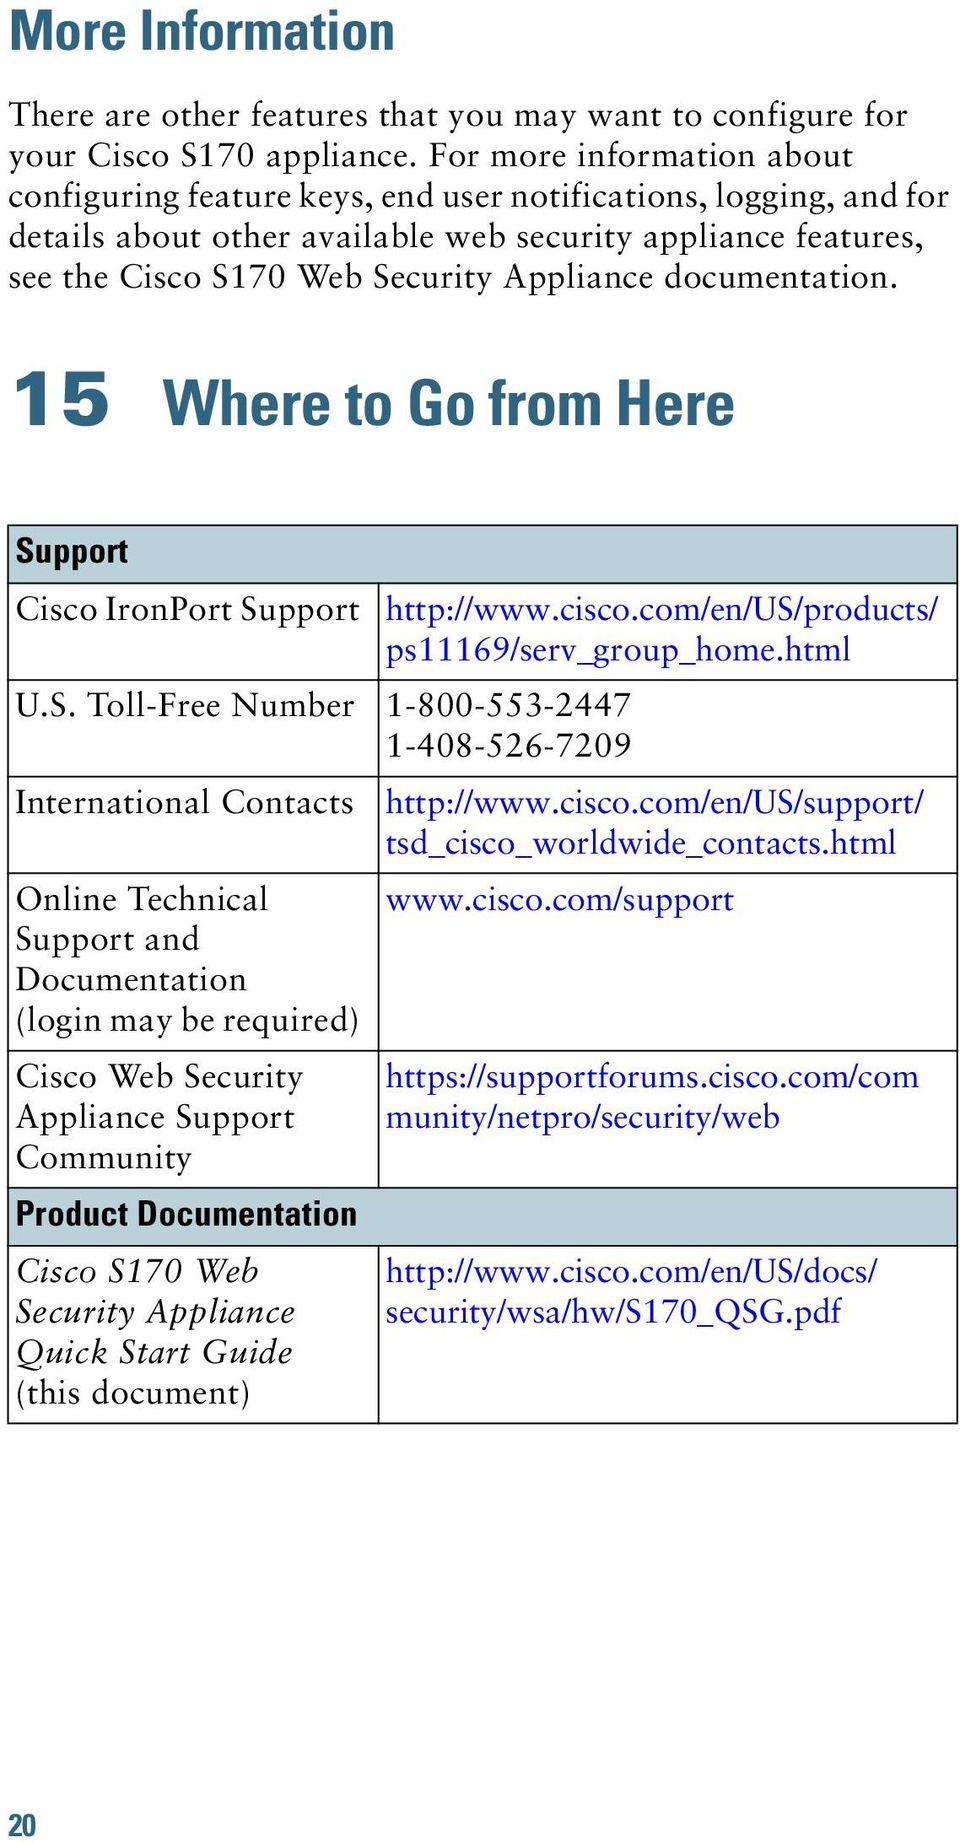 documentation. 15 Where to Go from Here Support Cisco IronPort Support U.S. Toll-Free Number 1-800-553-2447 1-408-526-7209 http://www.cisco.com/en/us/products/ ps11169/serv_group_home.